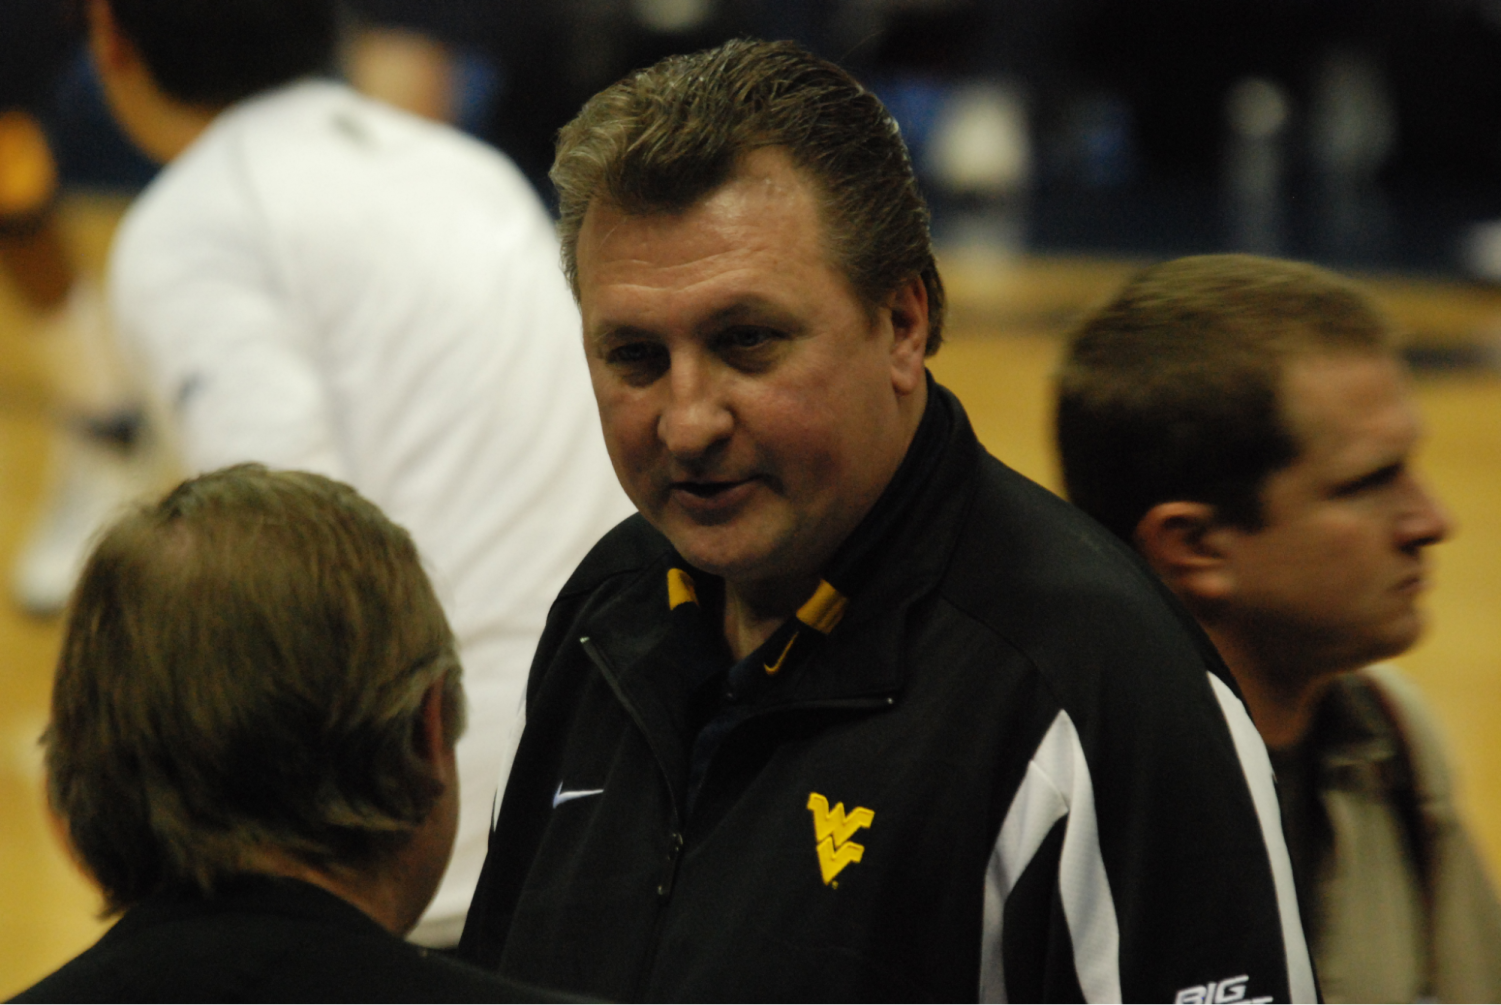 West Virginia head coach Bob Huggins talking to an official during a 2008 game.